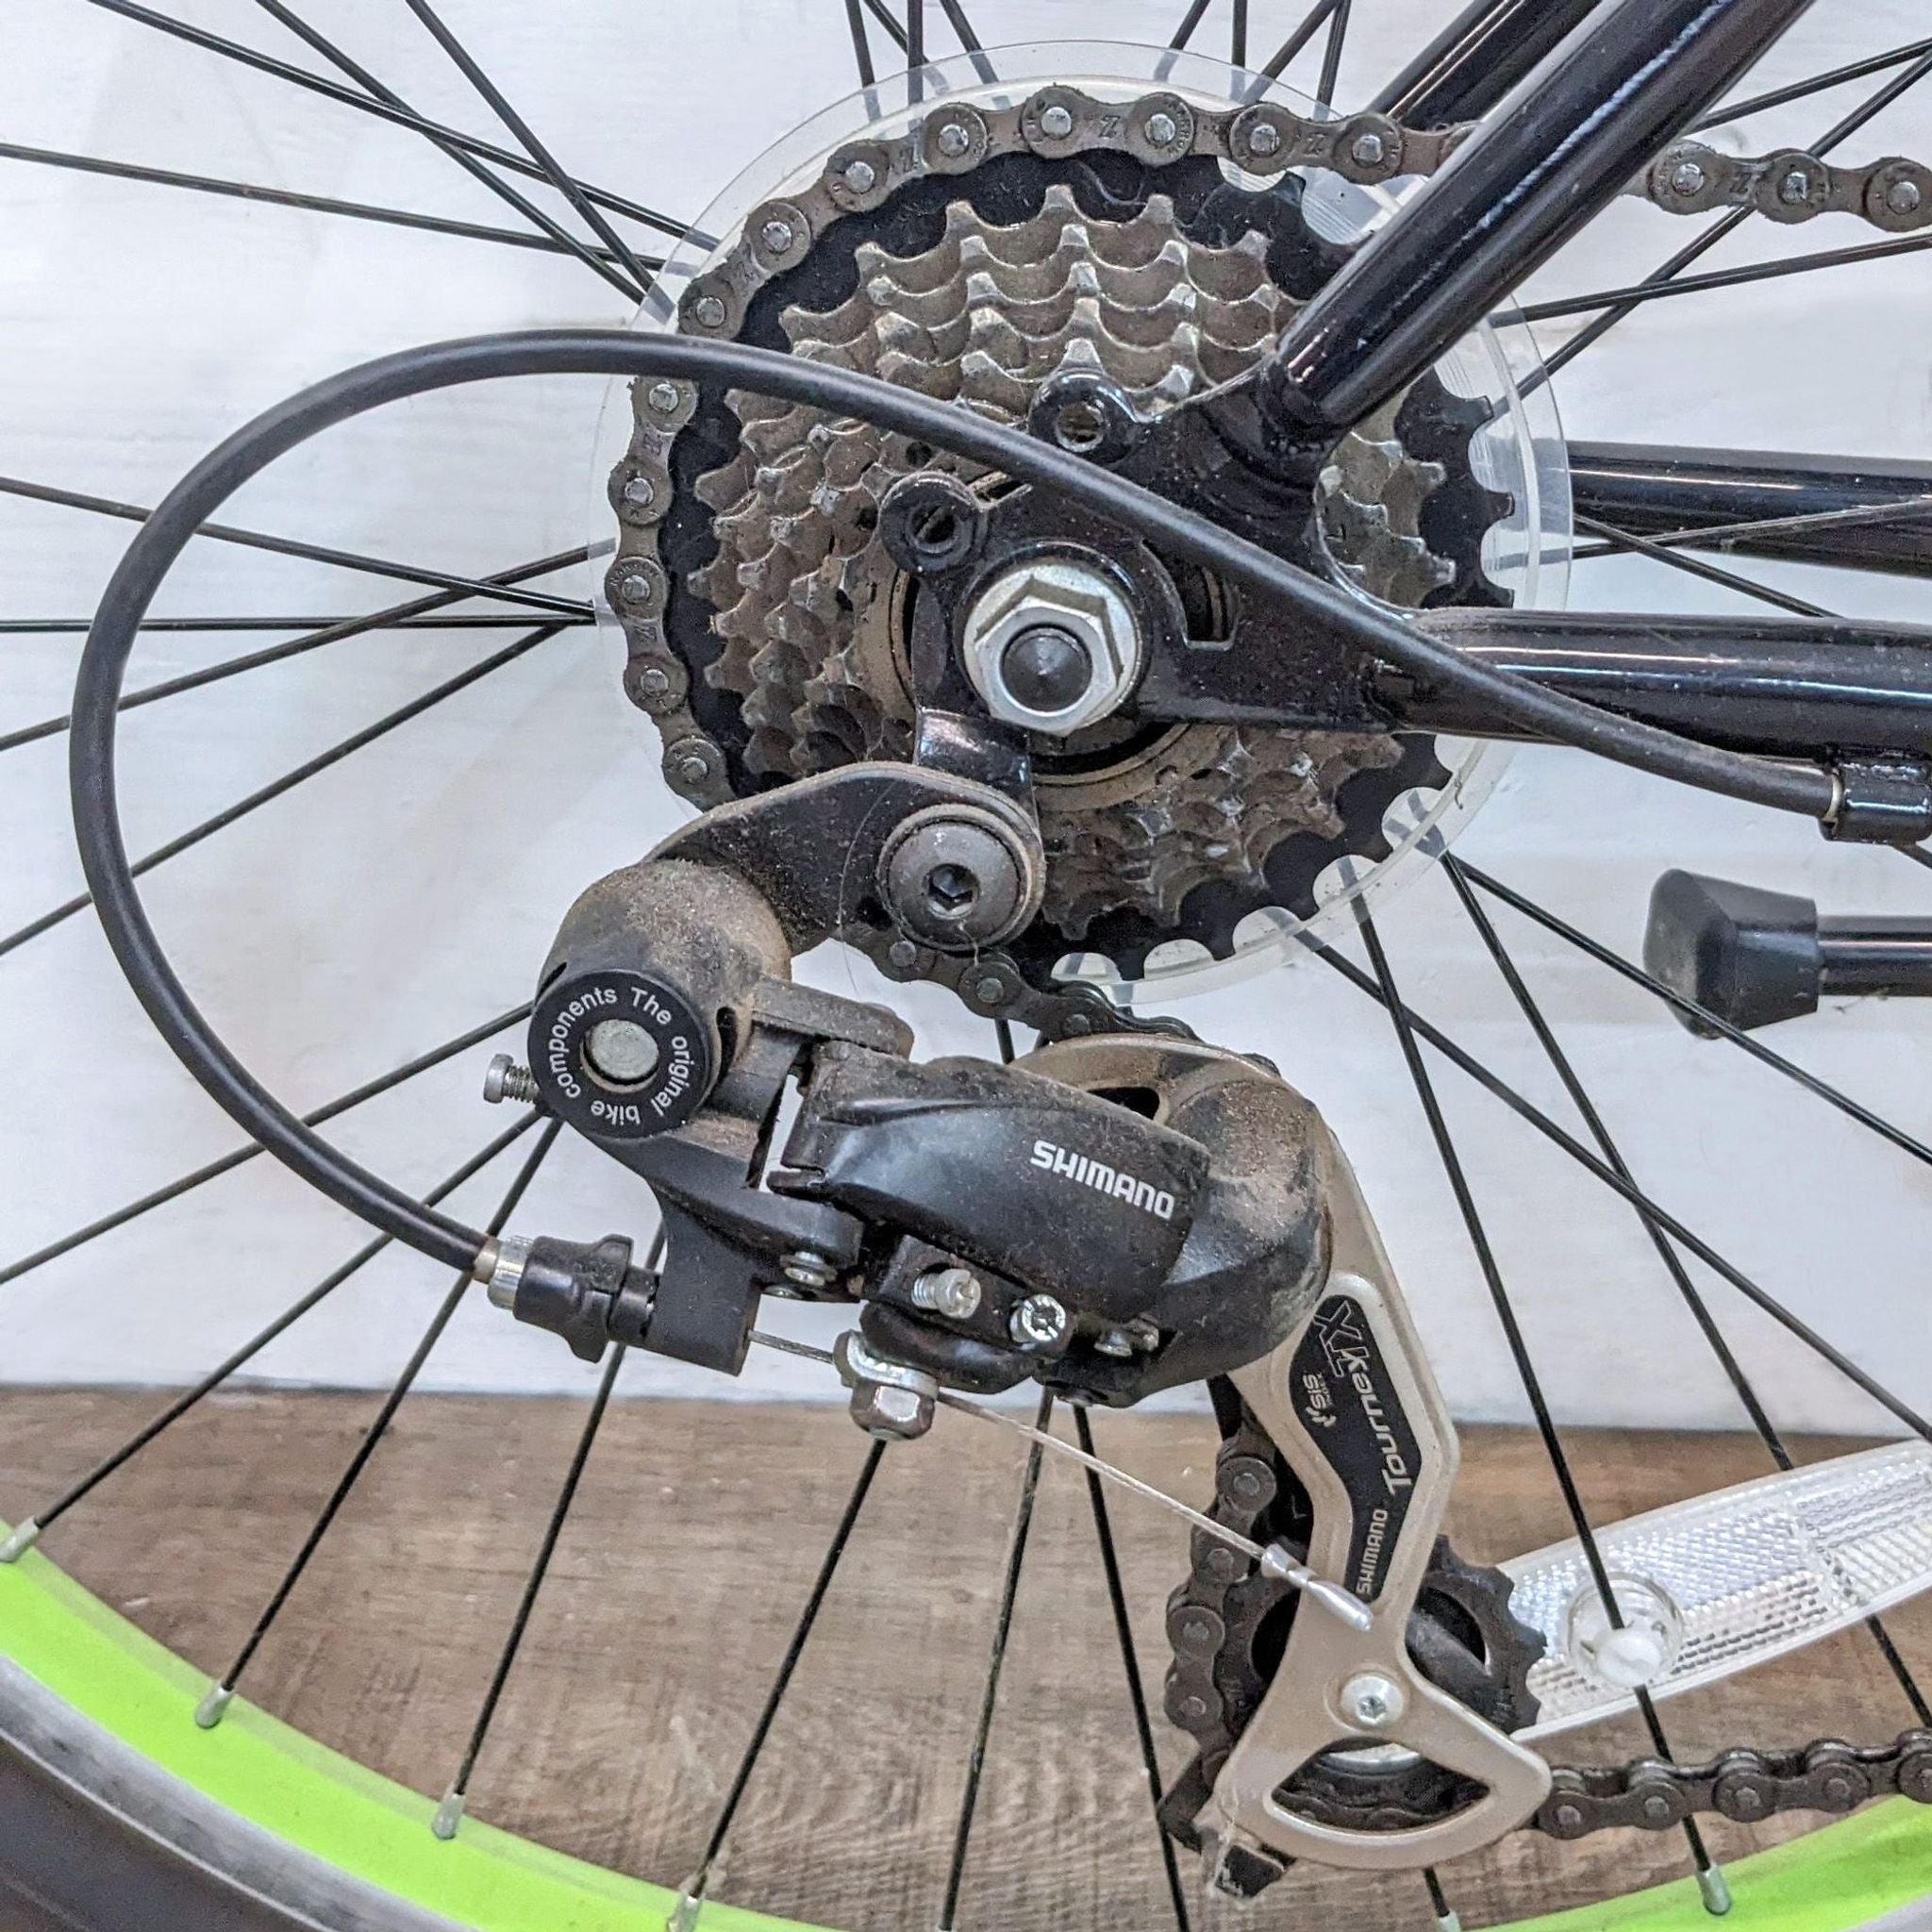 Close-up of a Schwinn bike's rear Shimano gear system and wheel showing the chain and cogs for changing gears.